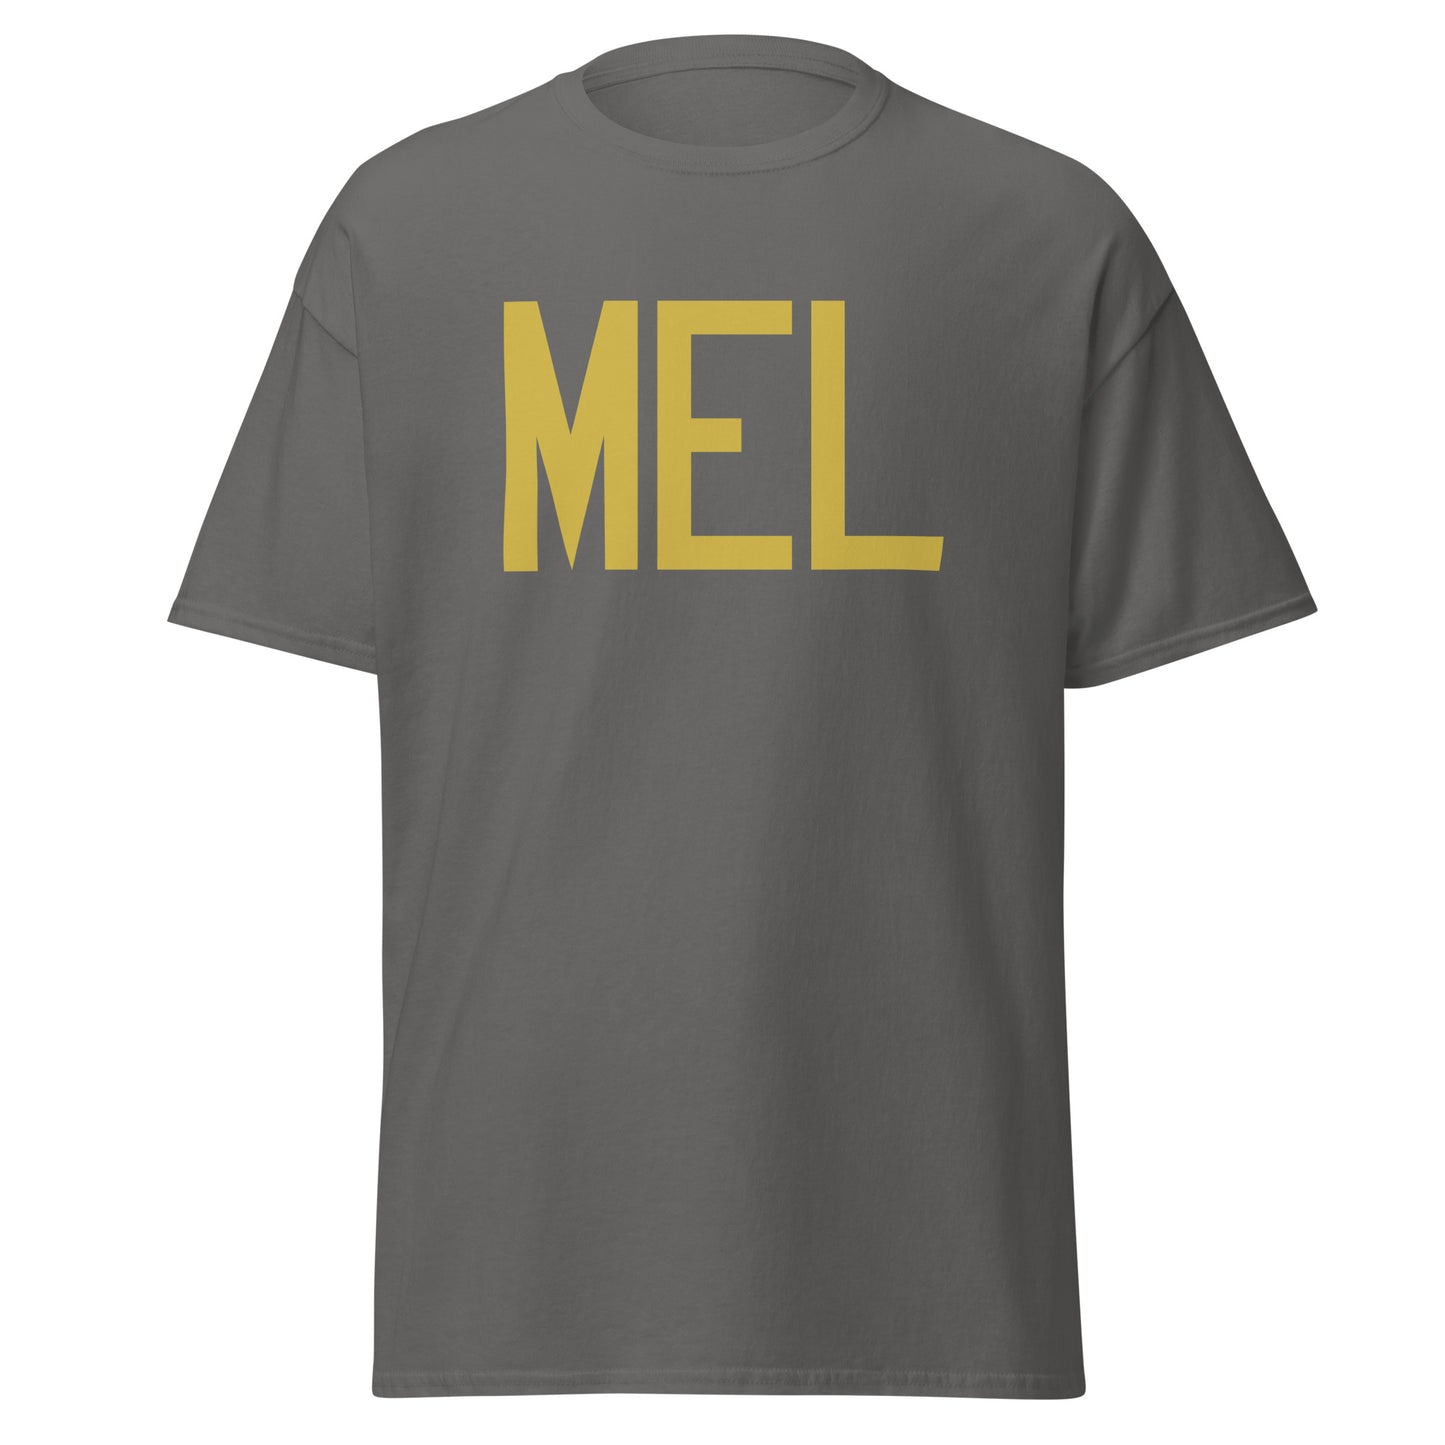 Aviation Enthusiast Men's Tee - Old Gold Graphic • MEL Melbourne • YHM Designs - Image 05